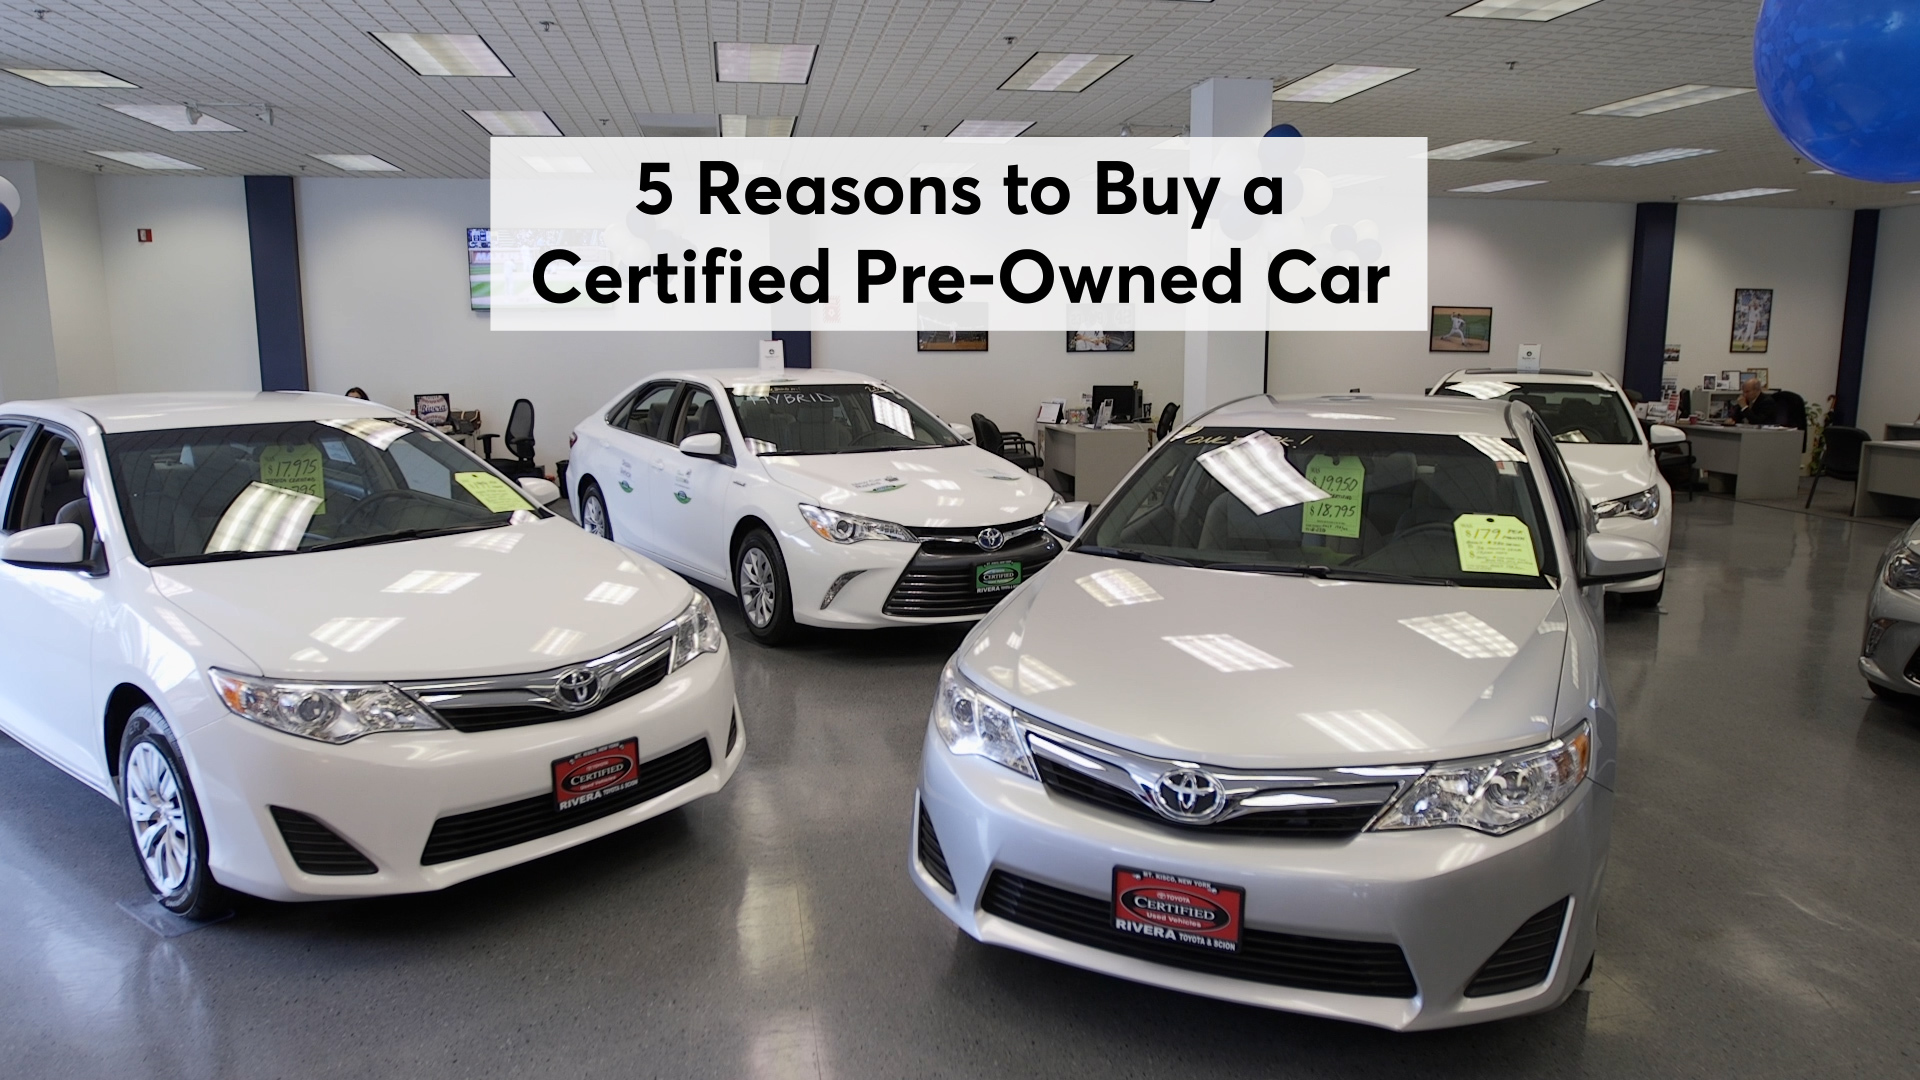 Should You Buy a New, Certified Pre-Owned, or Used Car? - Consumer